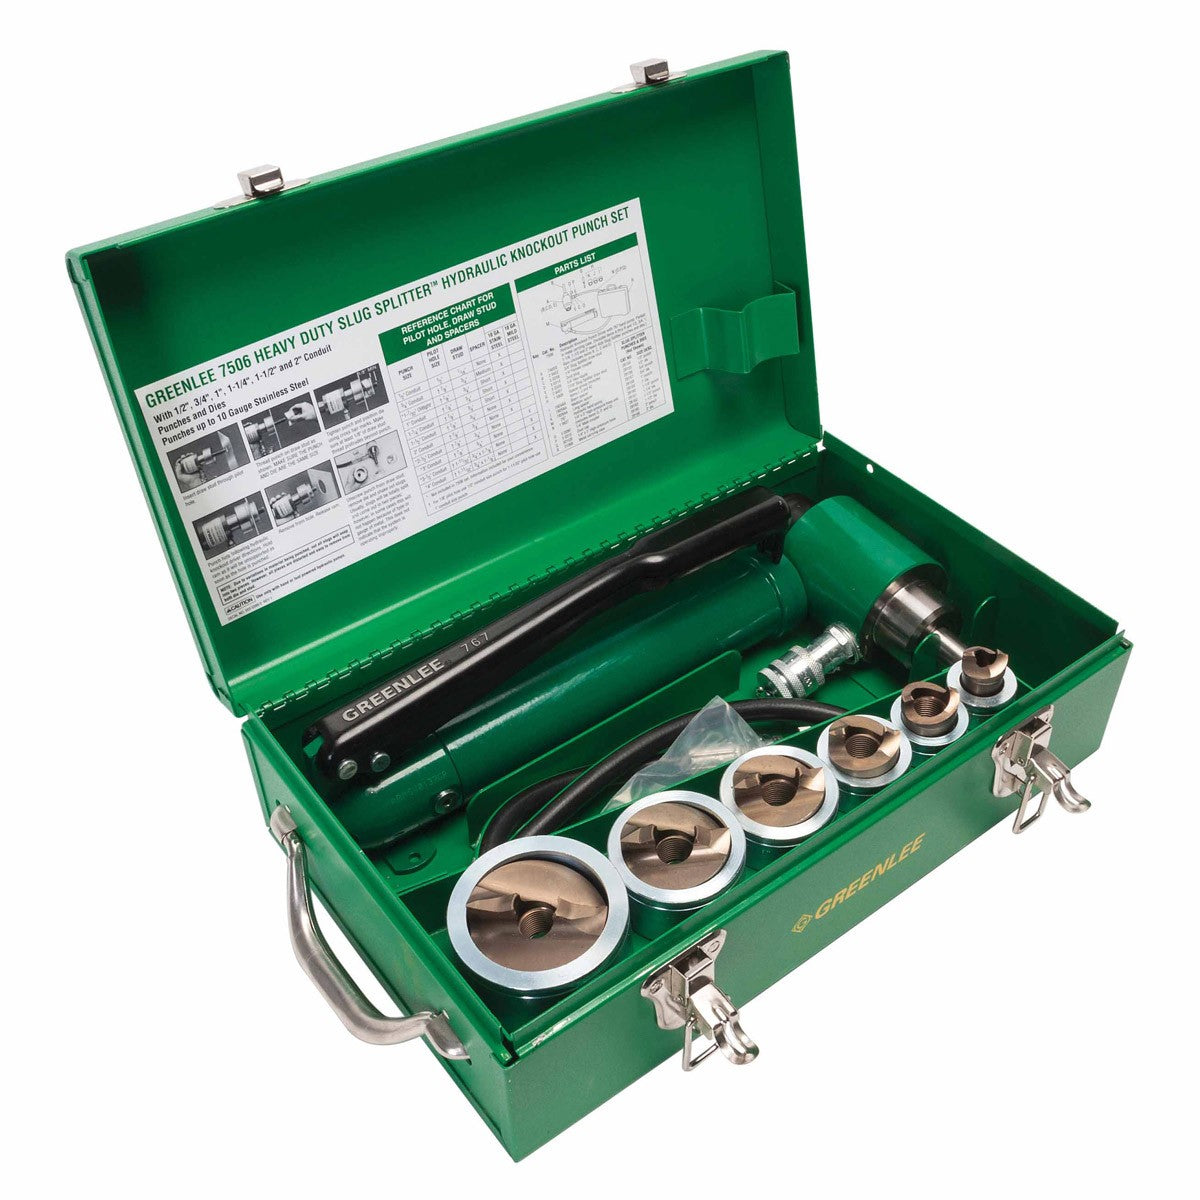 Greenlee 7506 1/2" - 2" Conduit Size Slug-Splitter Knockout Punch Kit with Hydraulic Ram and Hand P